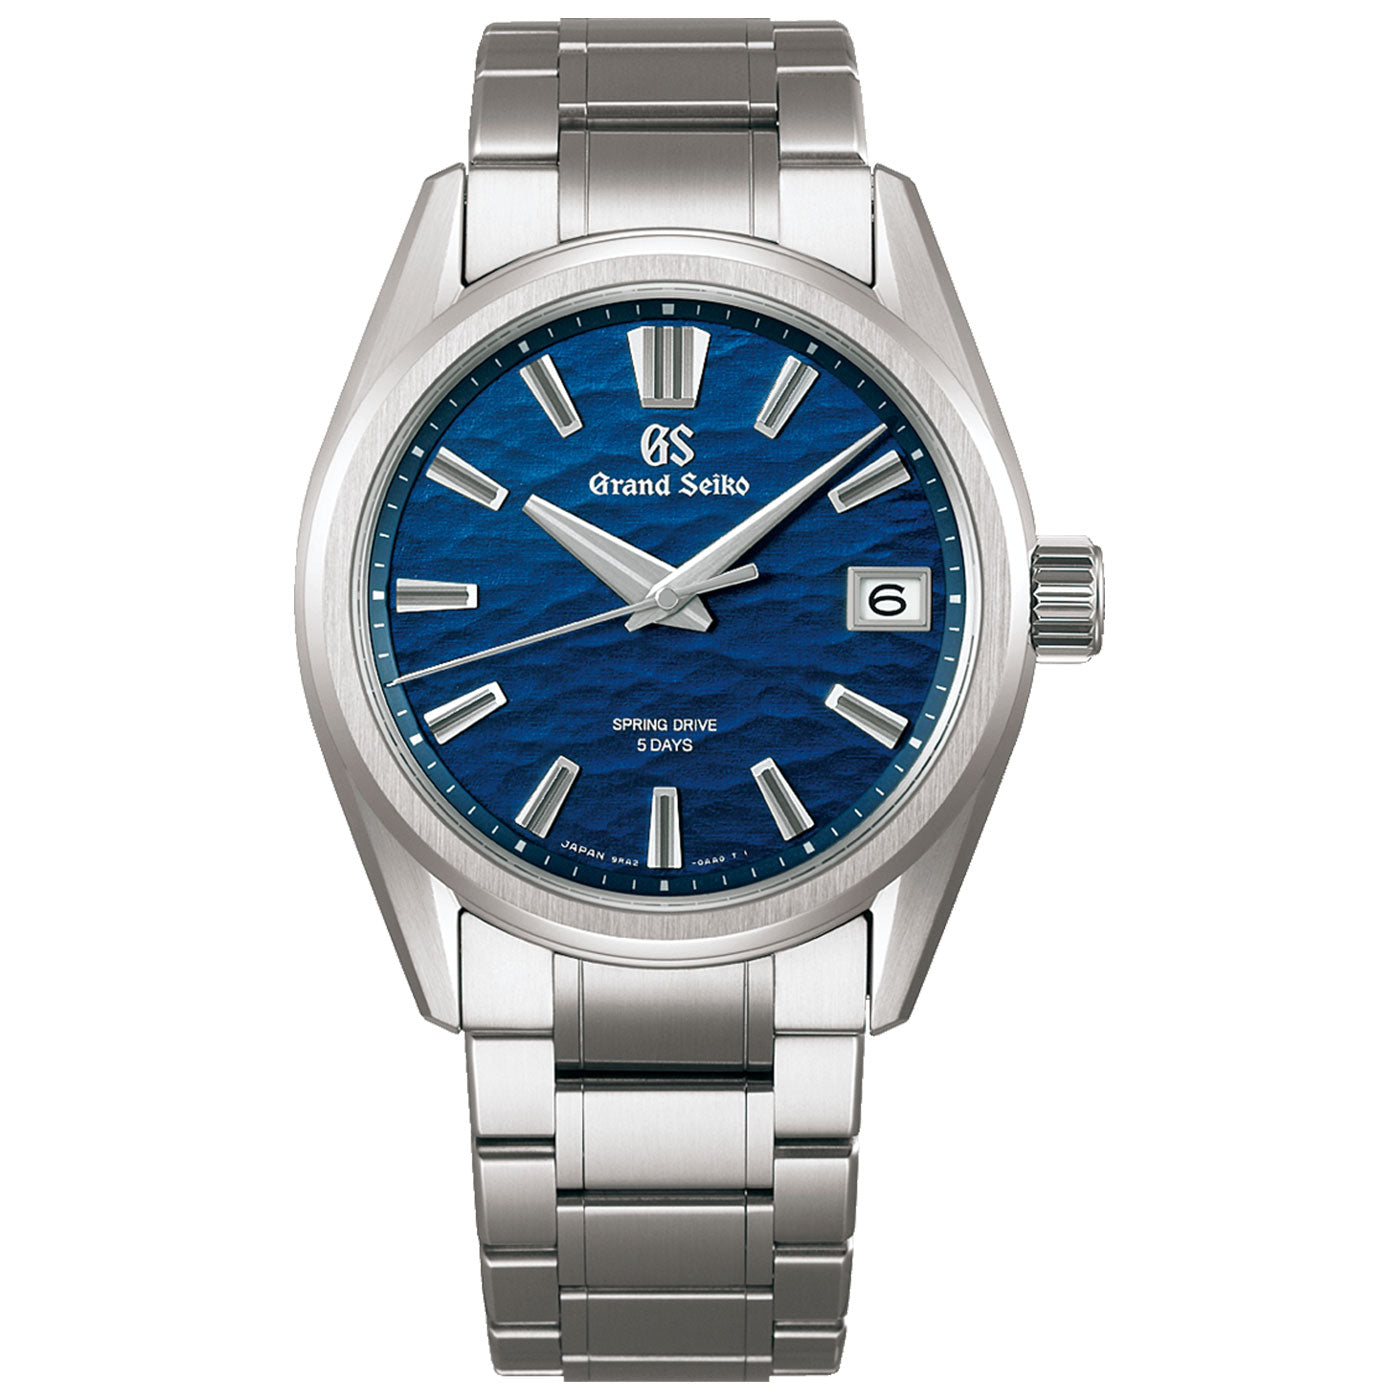 Grand Seiko Evolution 9 Collection Spring Drive 40mm Watch